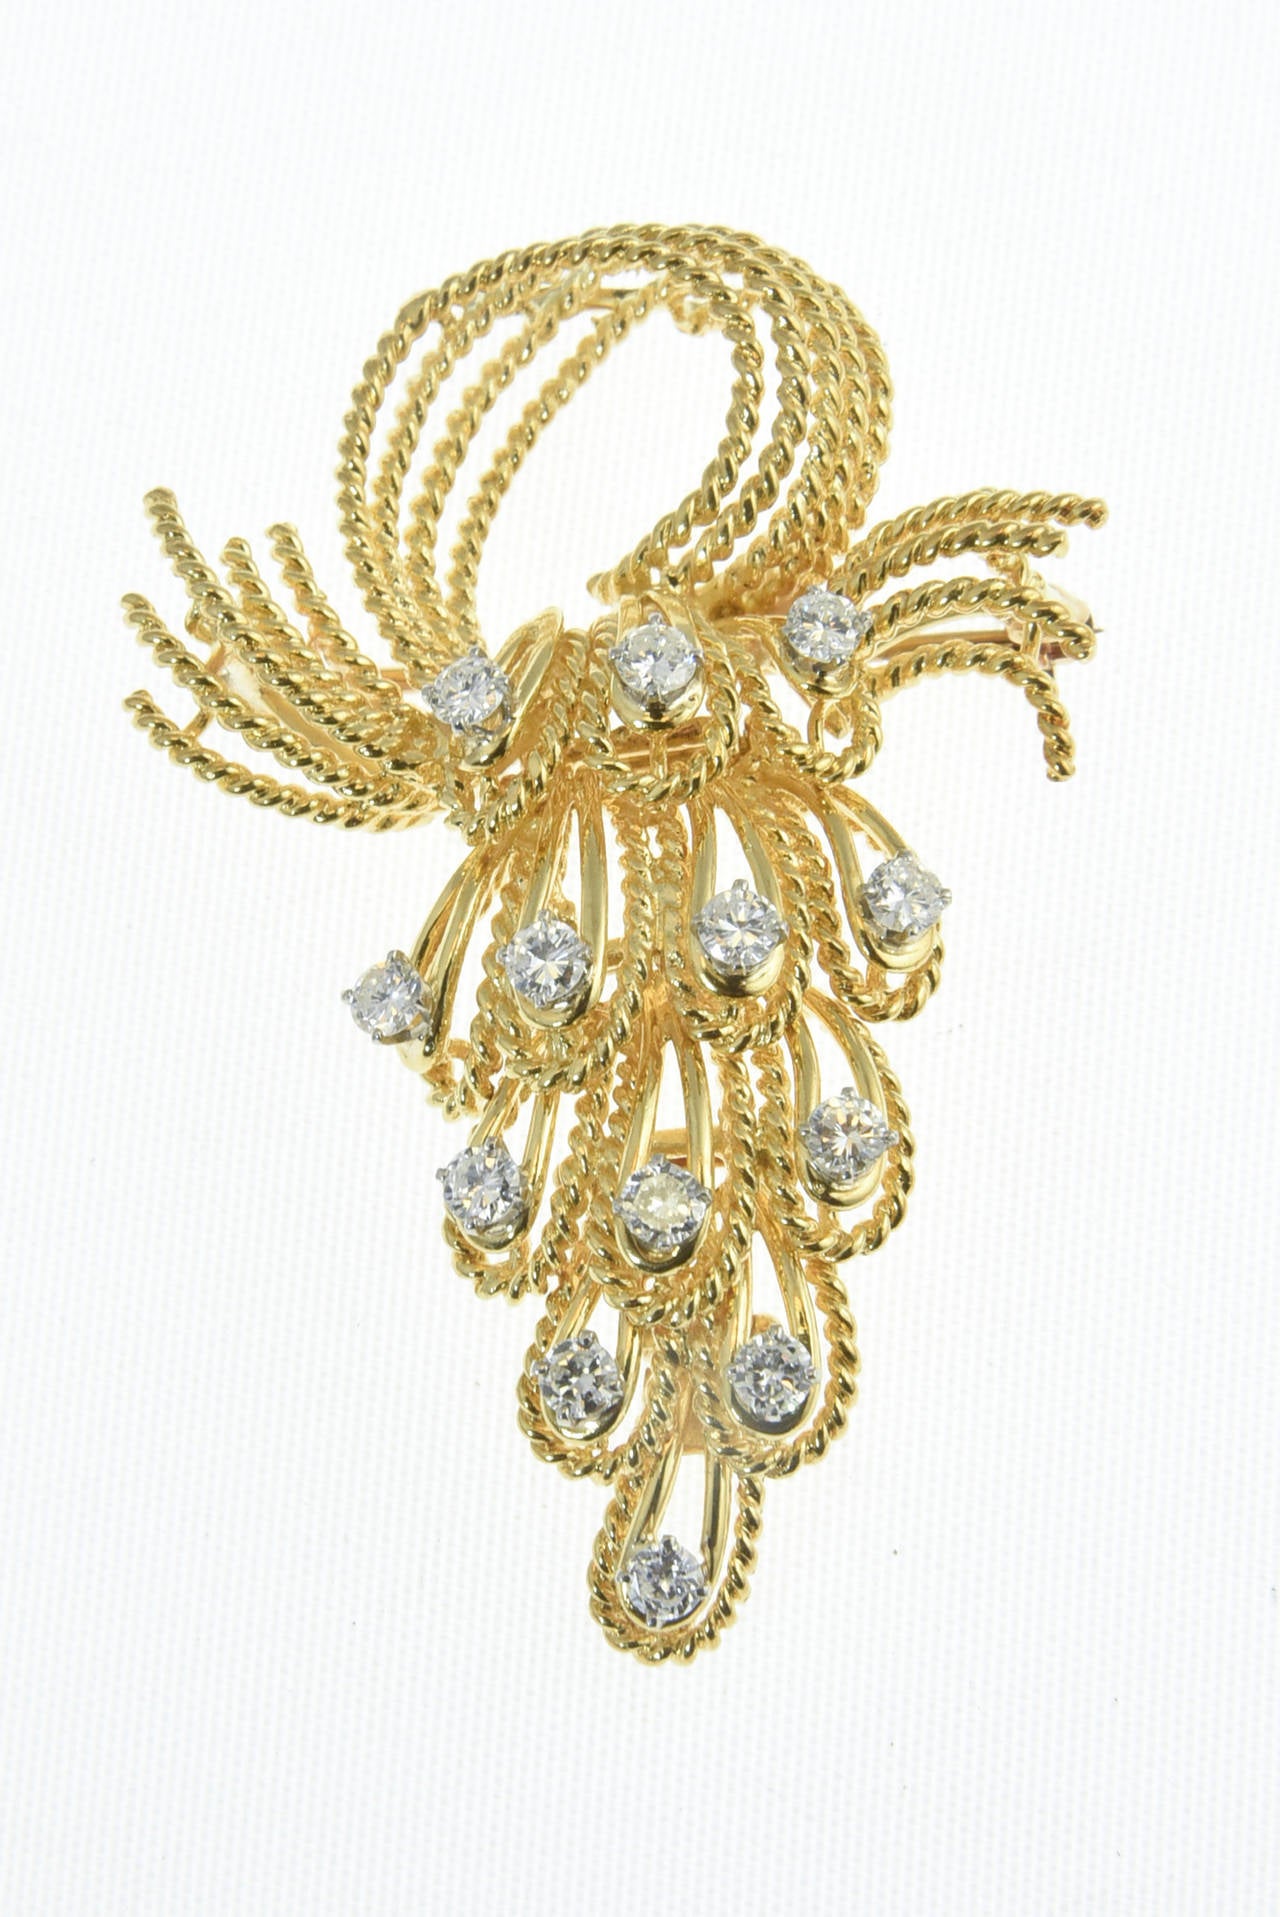 Round Cut French Articulated Twisted Diamond Gold Cascade Brooch and Earrings Suite For Sale